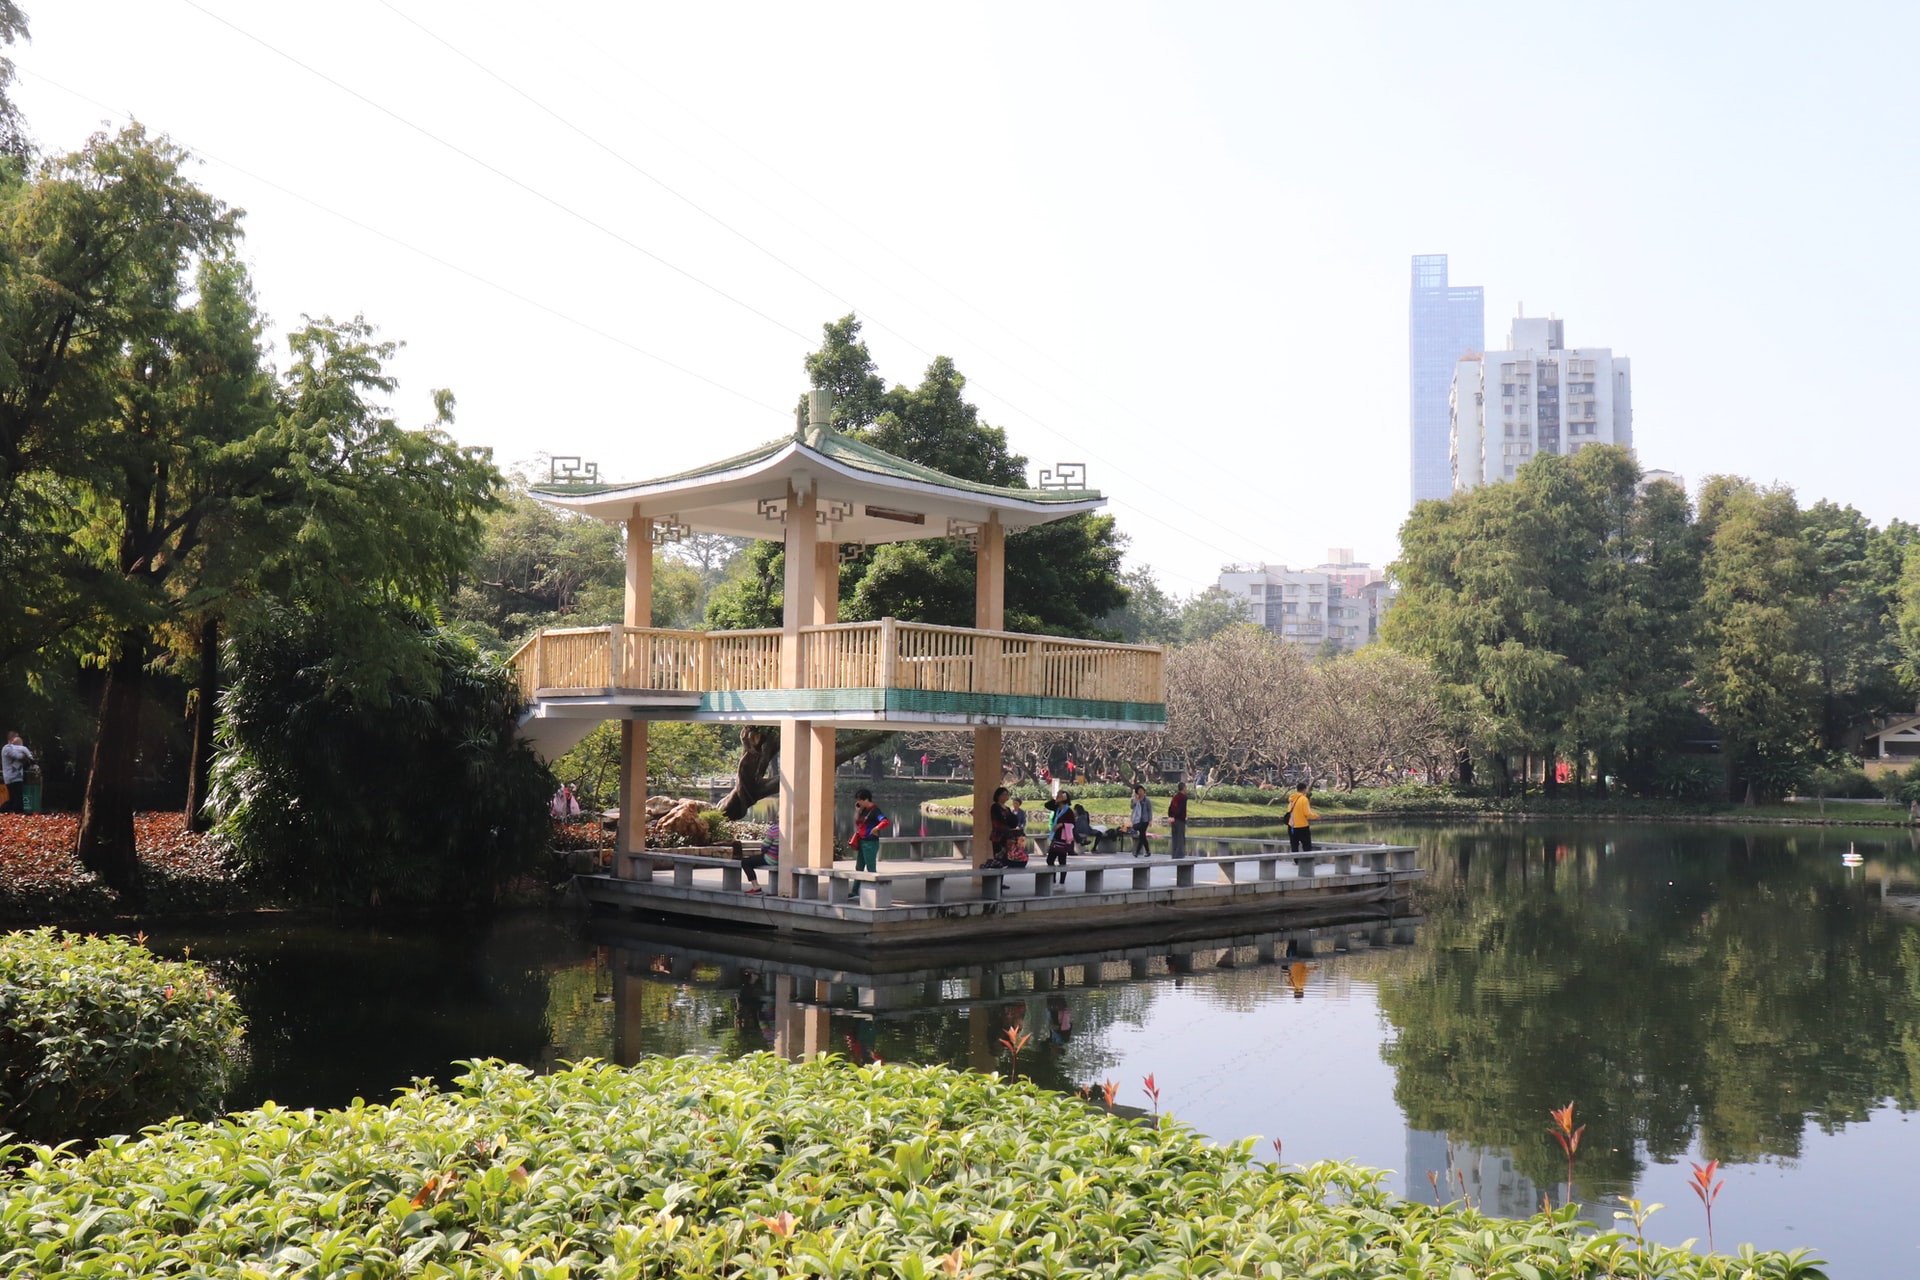 Chinese pavilion in park surrounded by trees and a pond in front of it, in the background you can see some skyscrapers